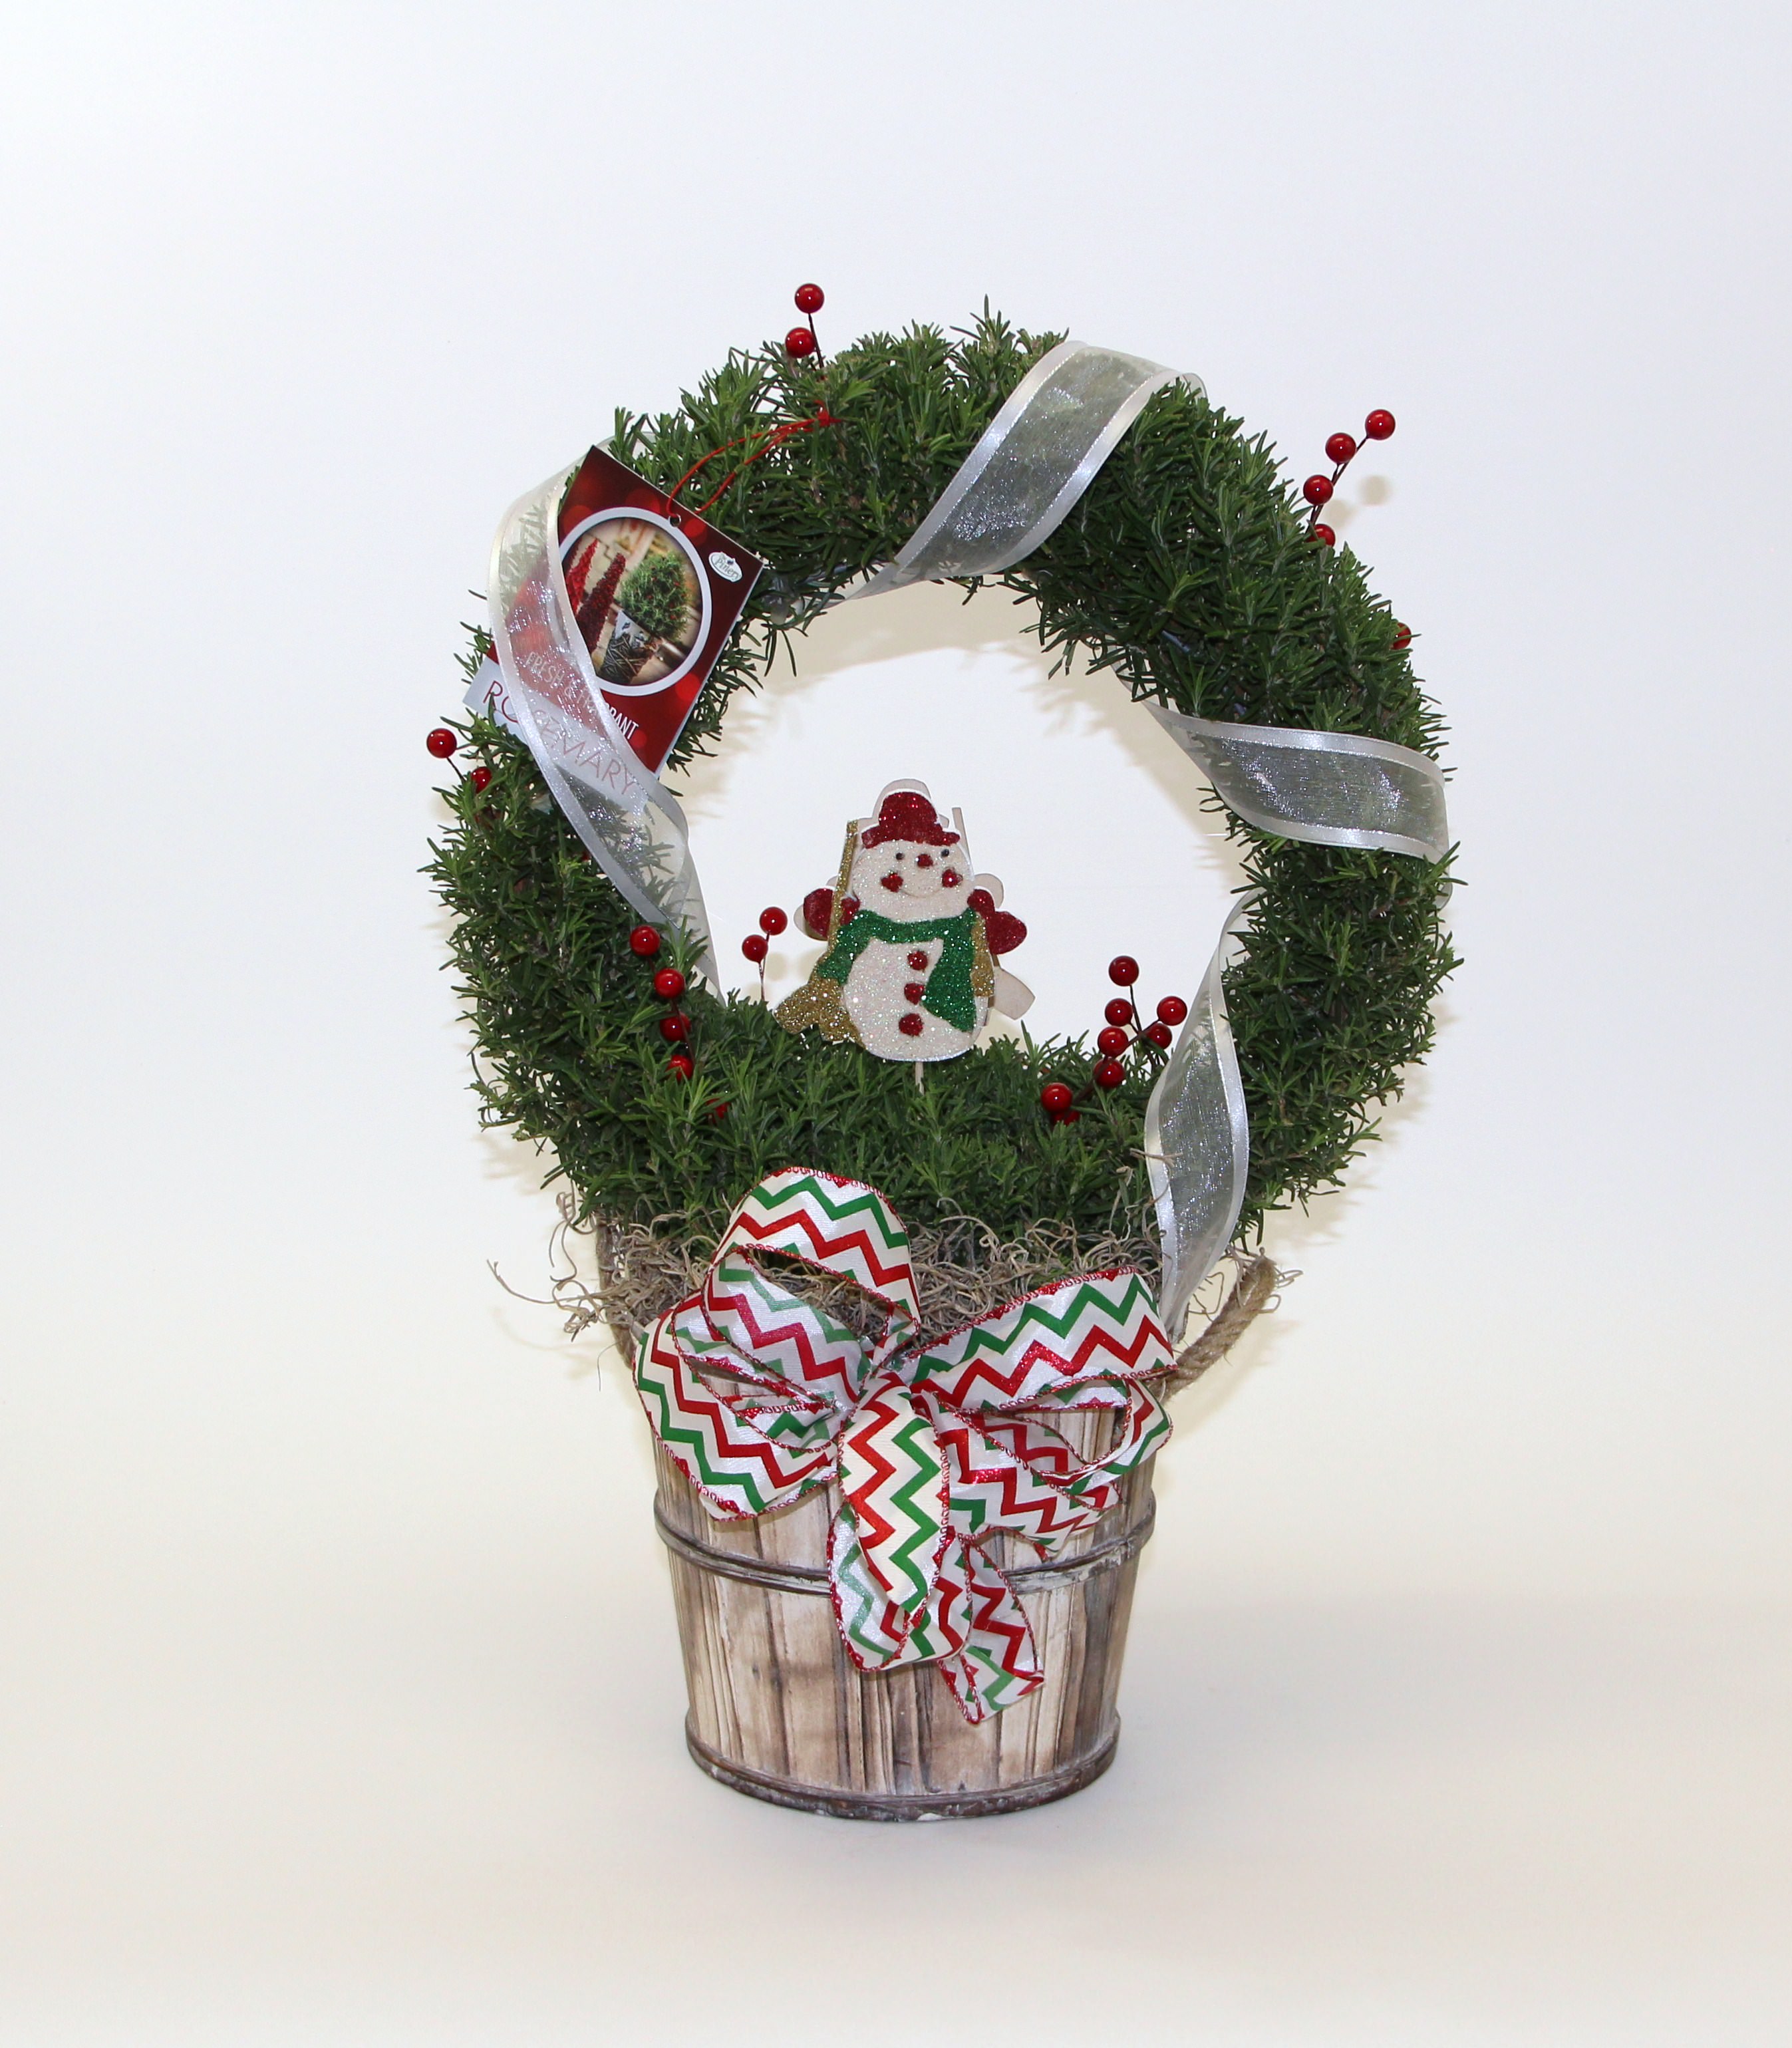 The Pinery Rosemary Wreath Topiary Basket